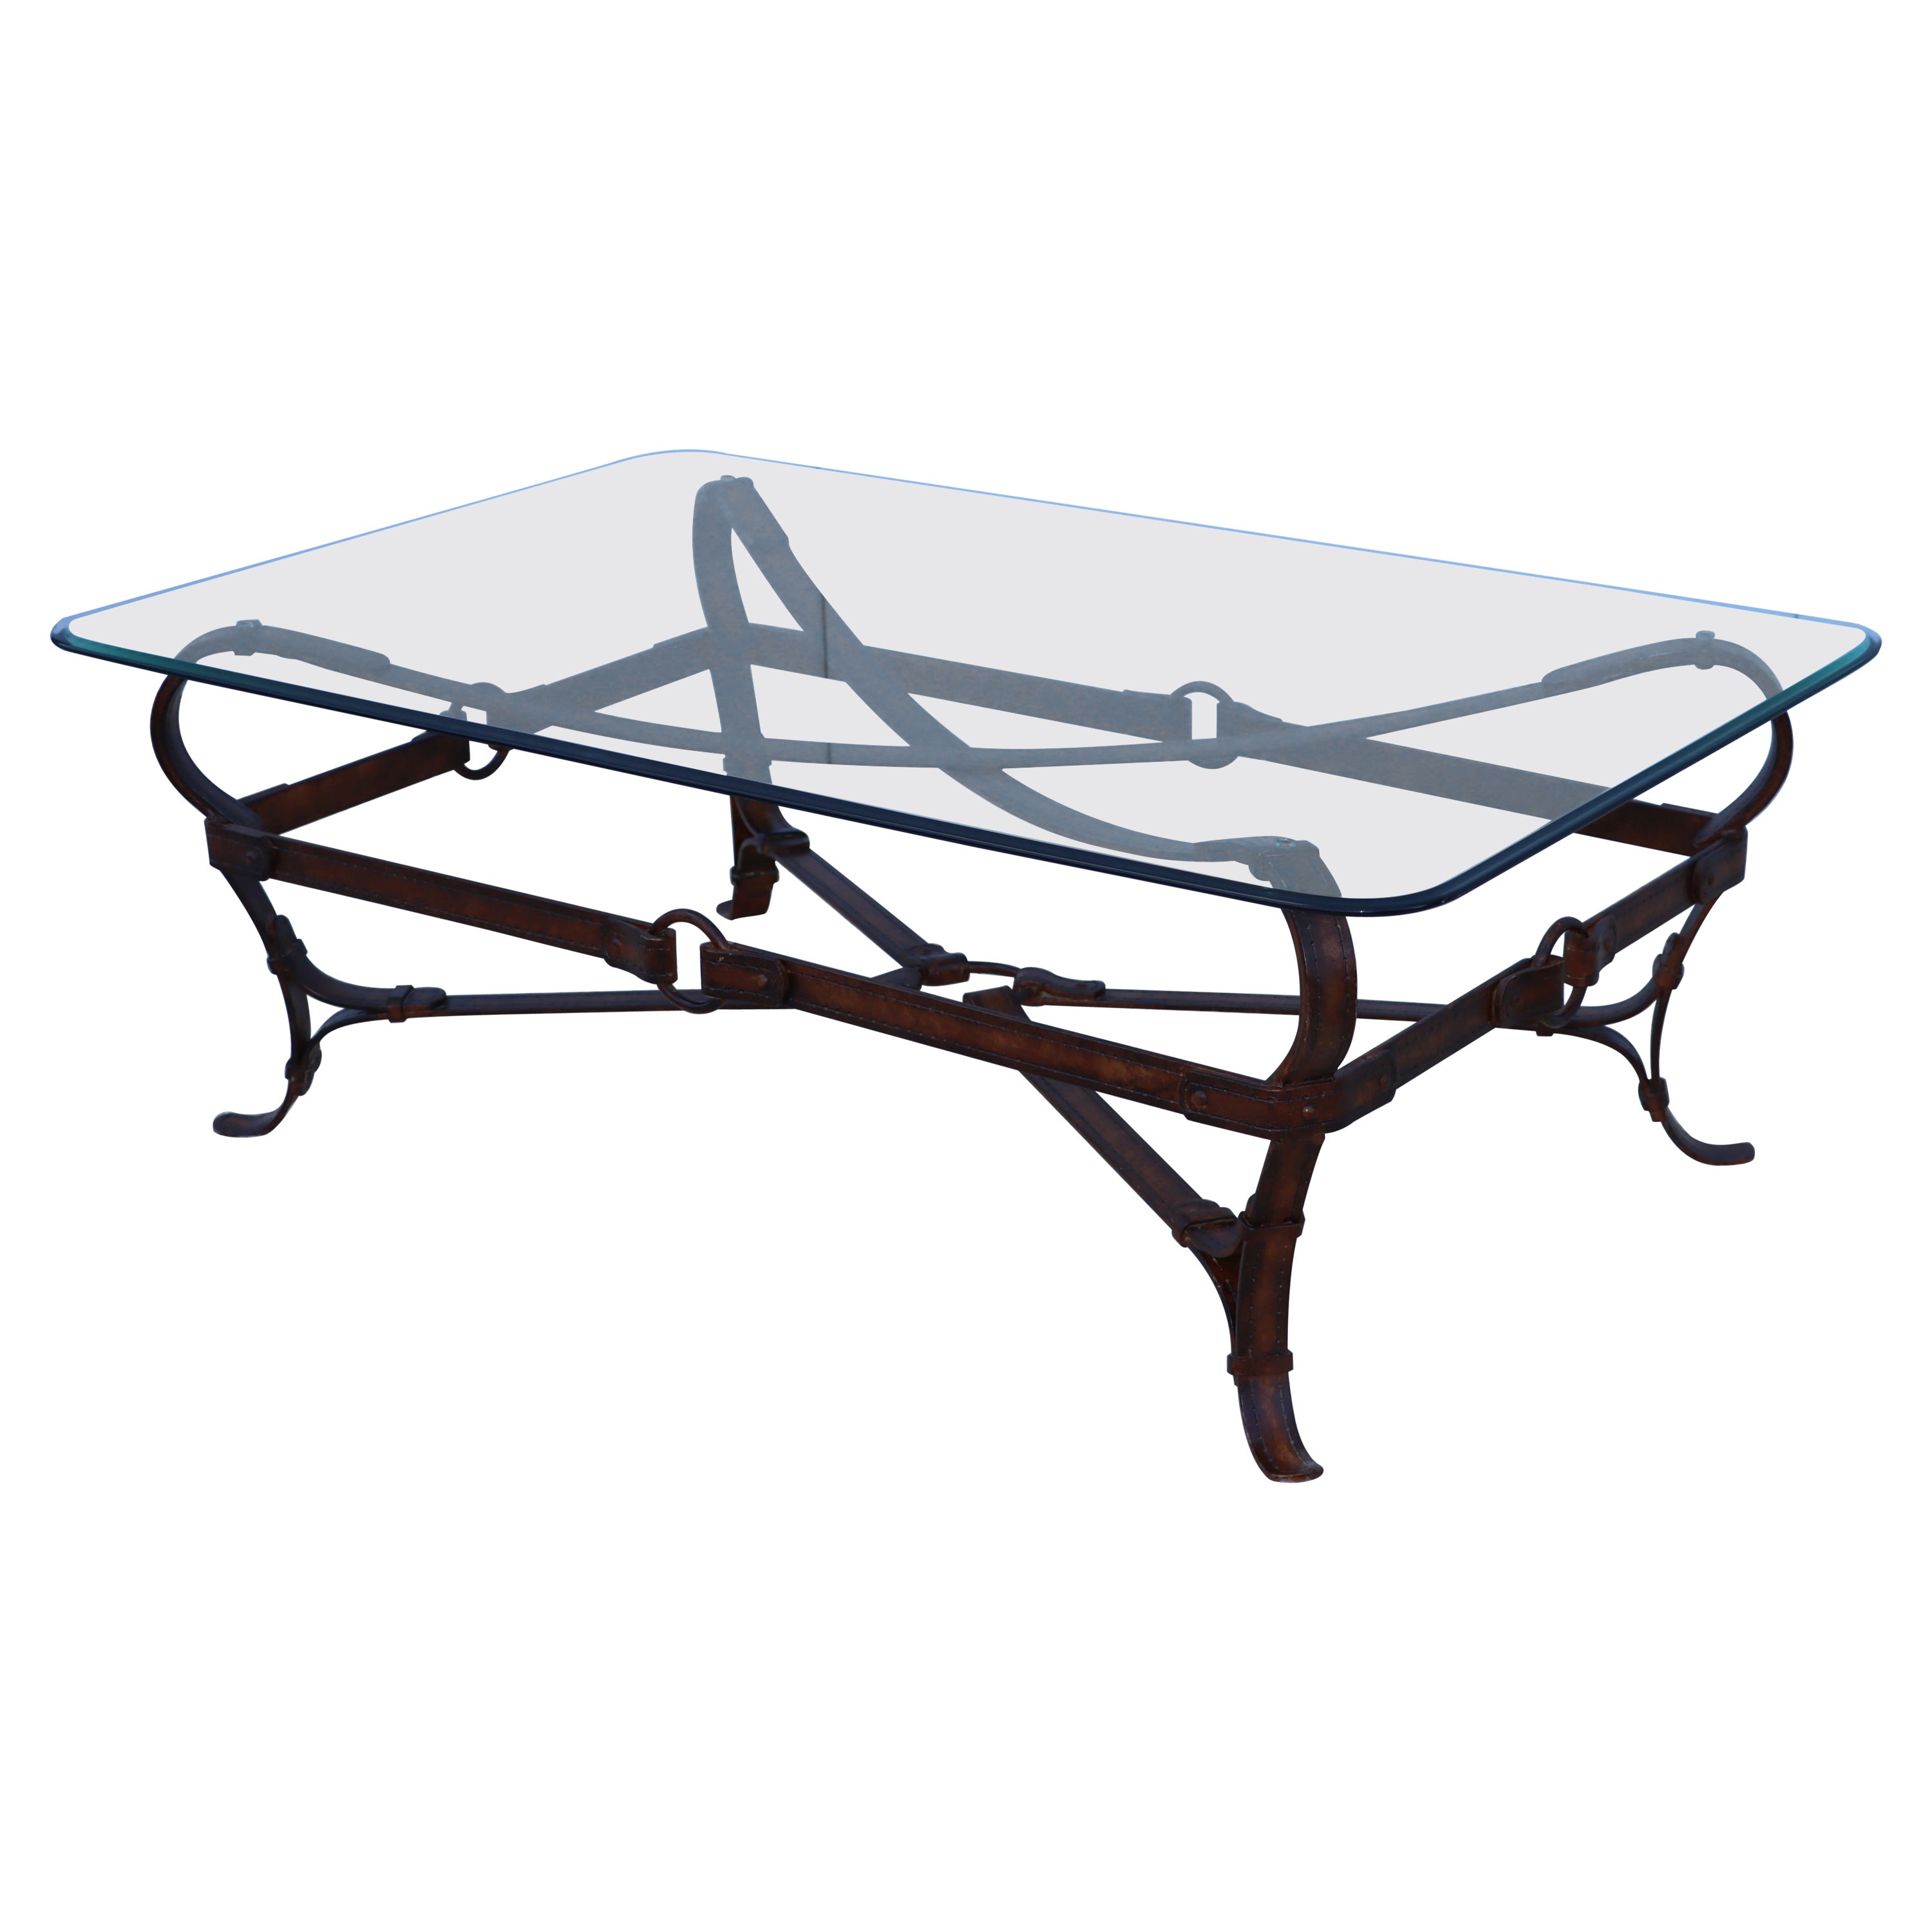 Hermes Style Faux Leather Iron and Glass Coffee Table